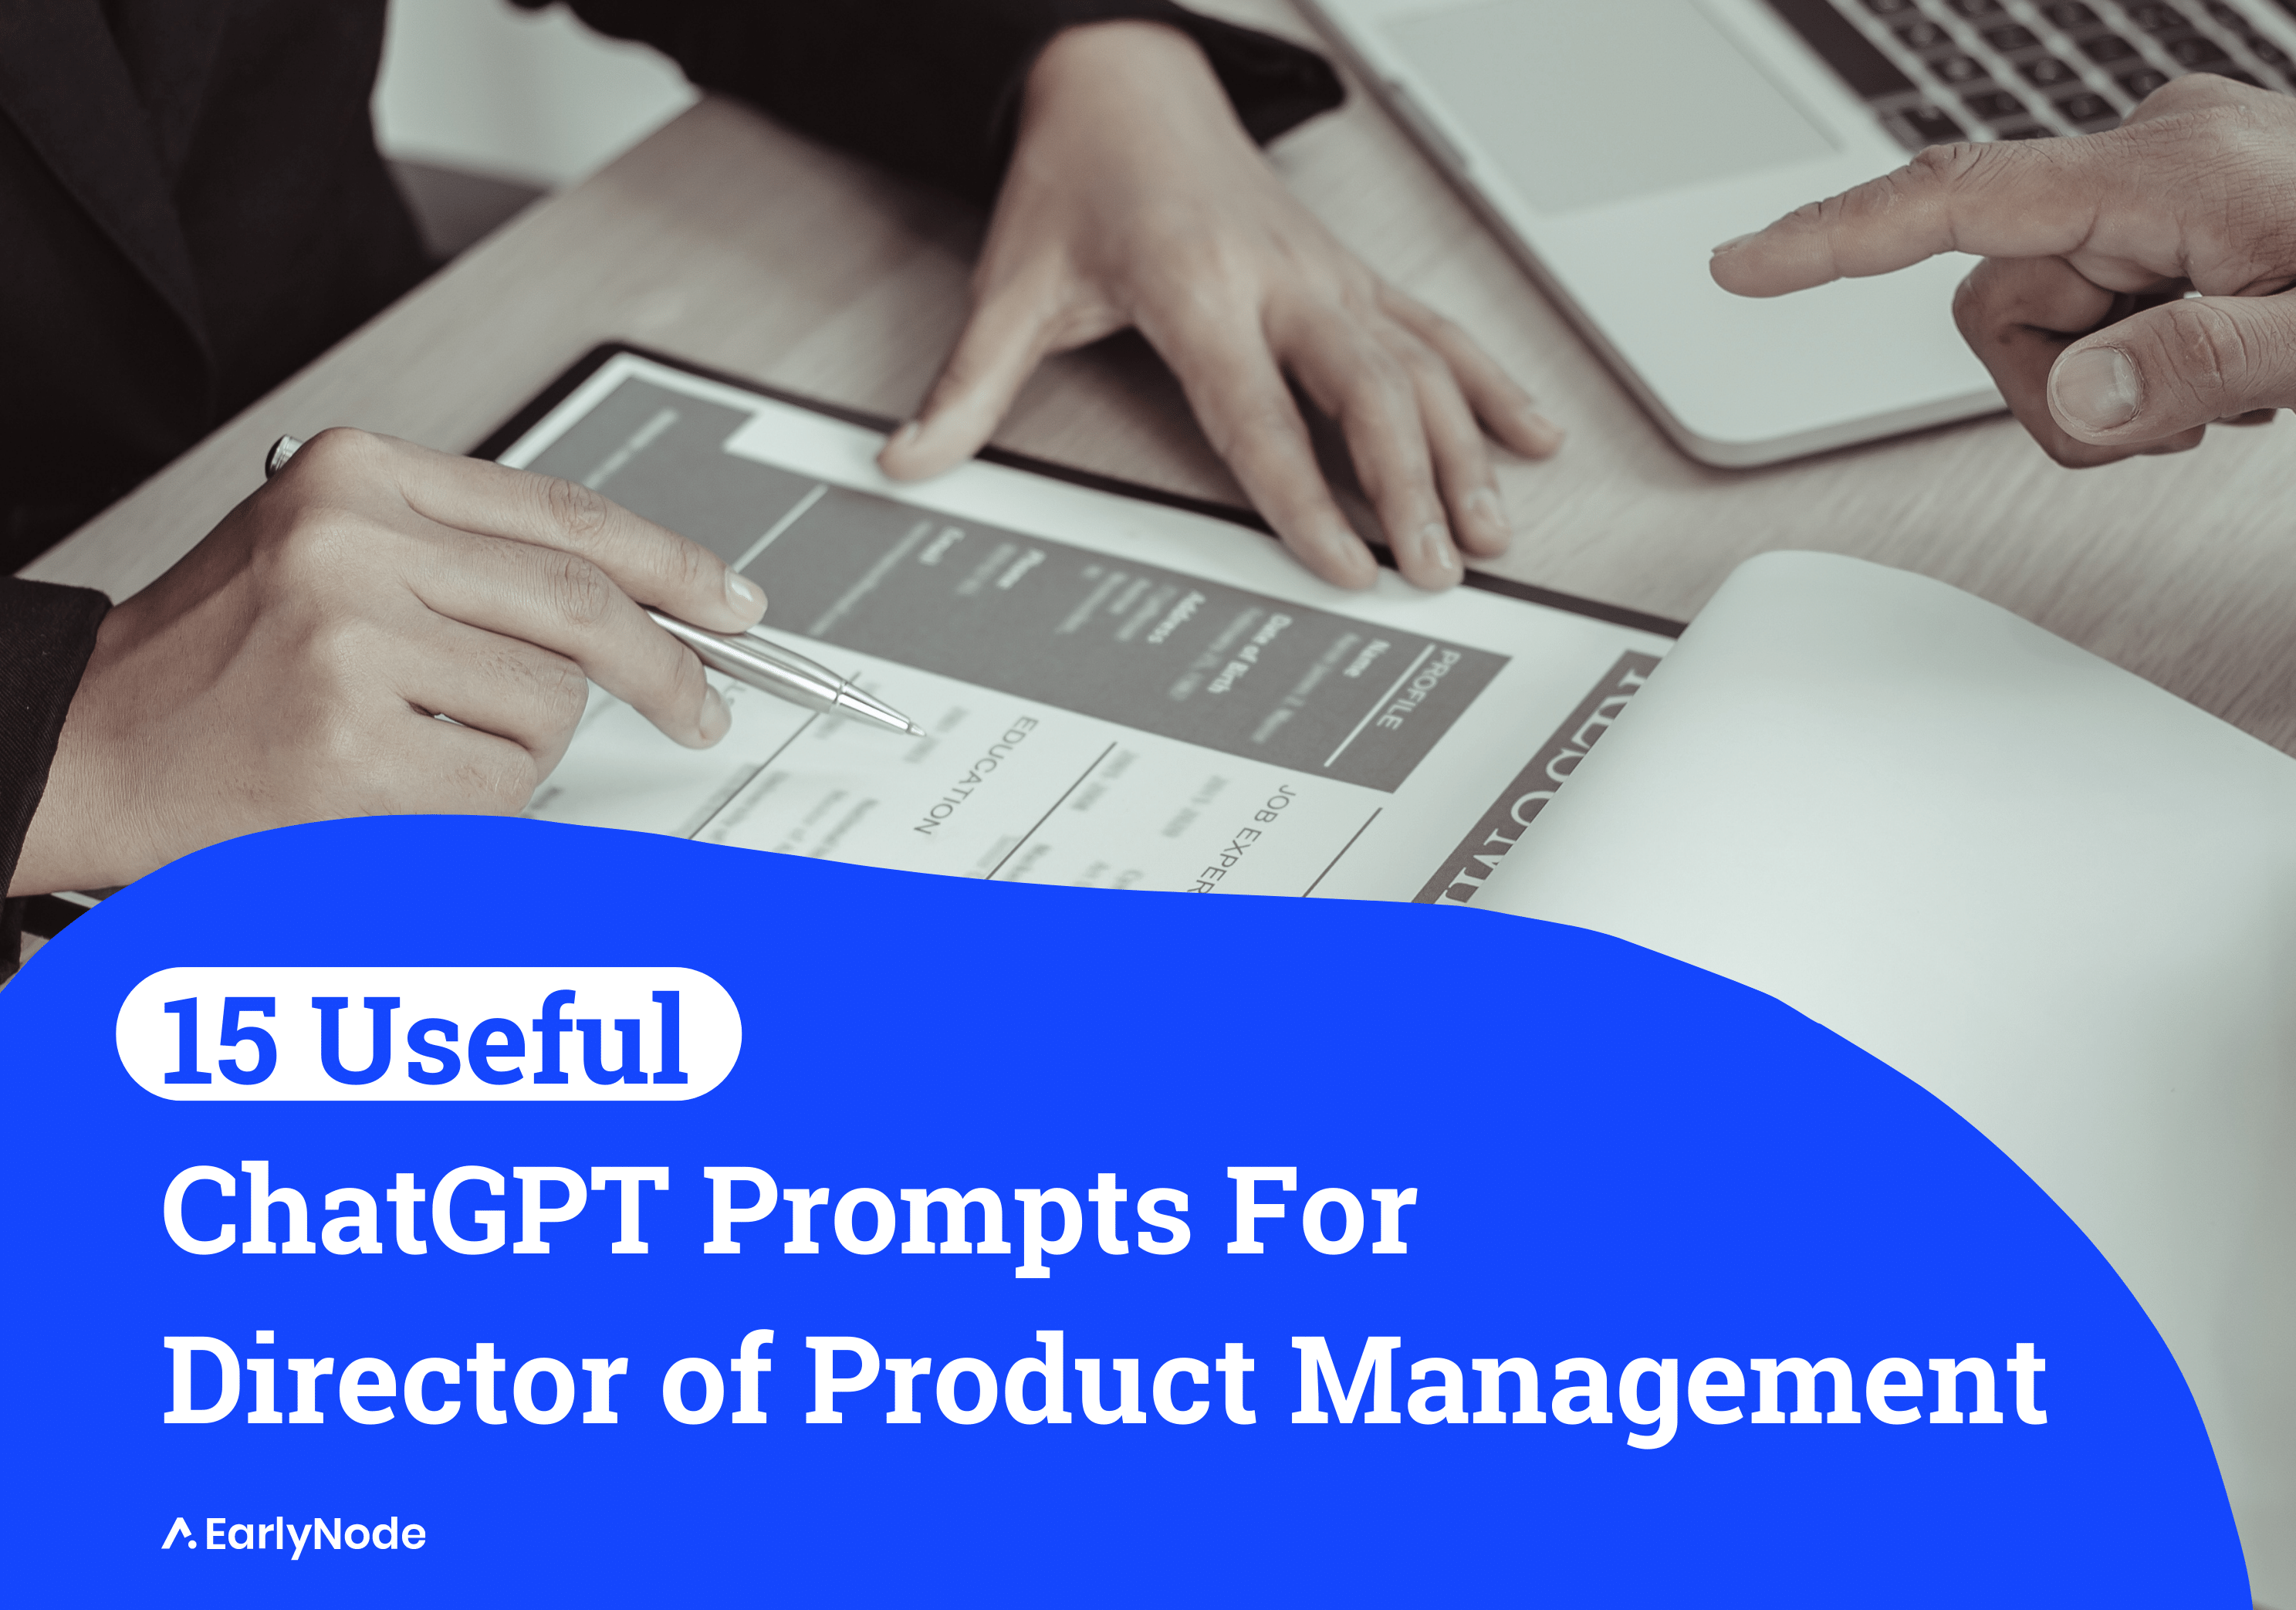 15 Tailored ChatGPT Prompts For Director of Product Management